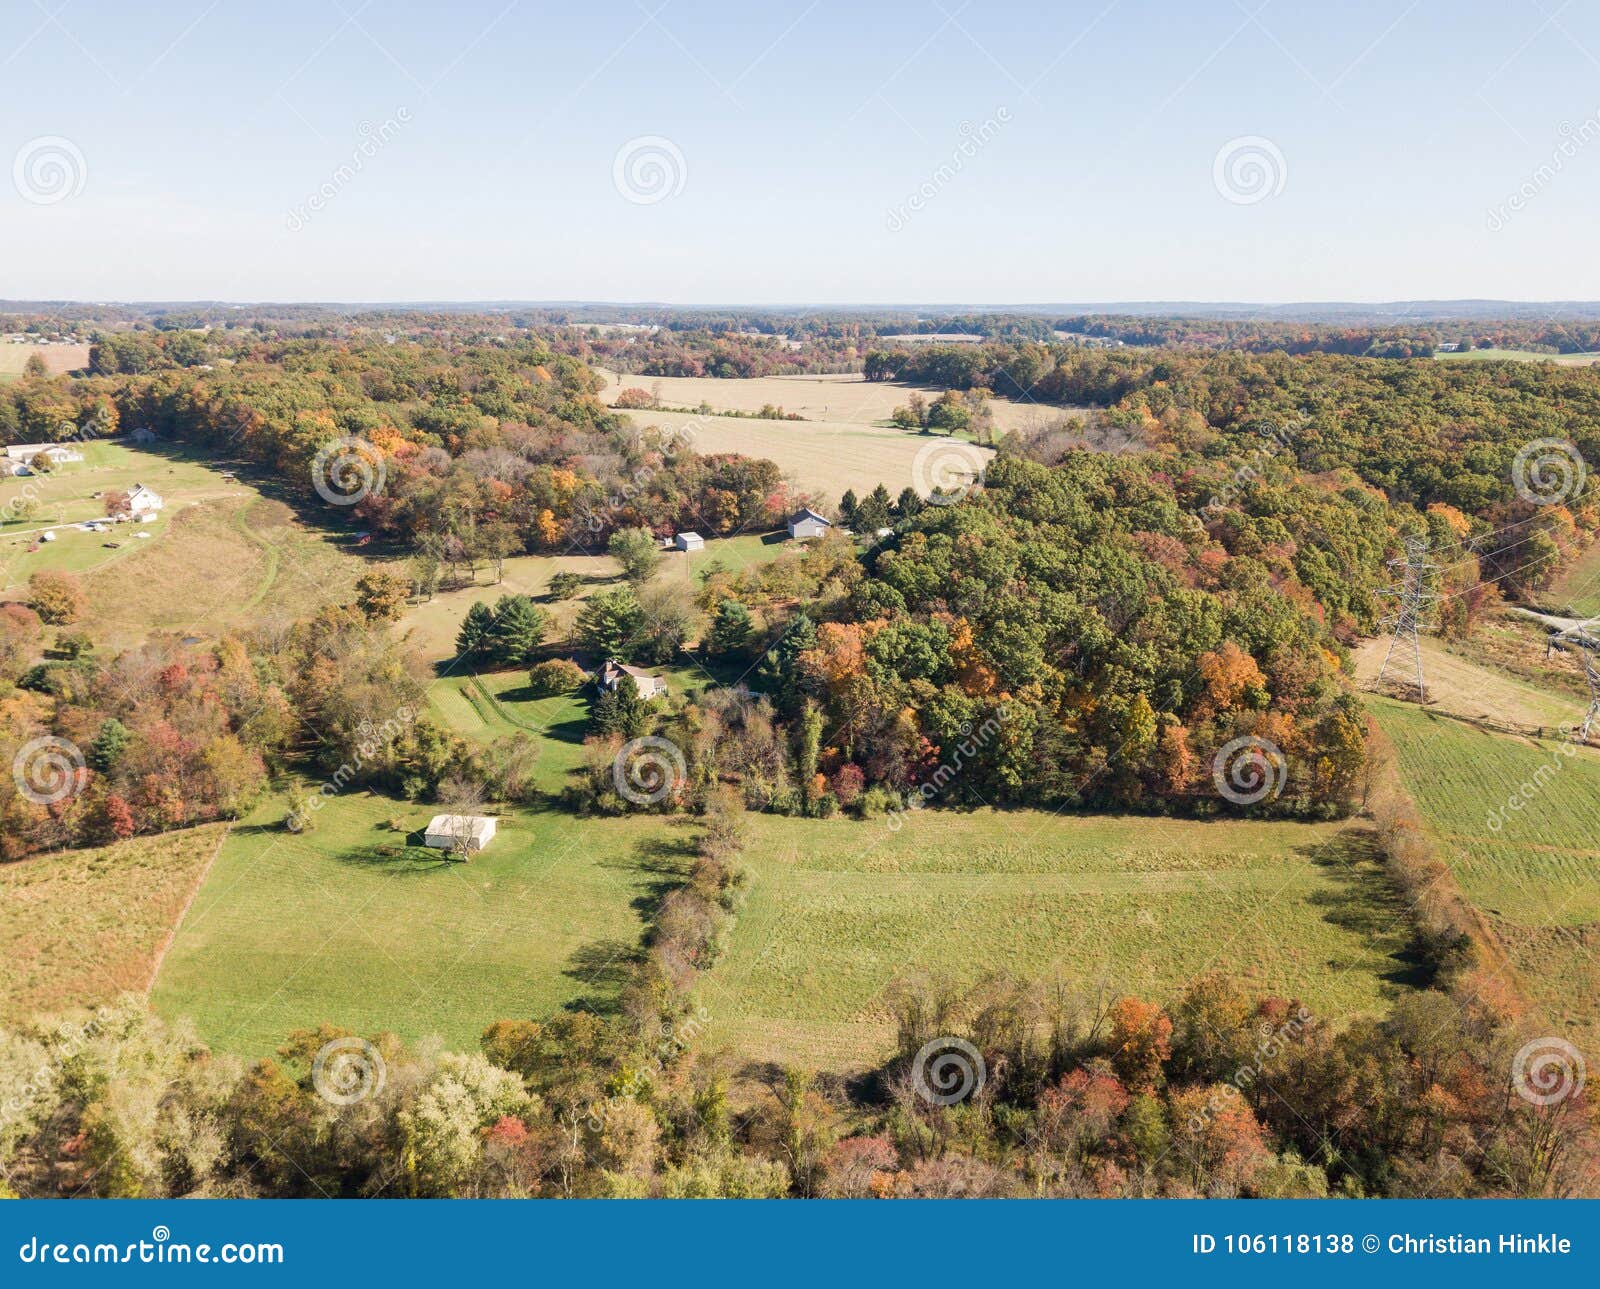 aerials of country farm land in white hall, maryland